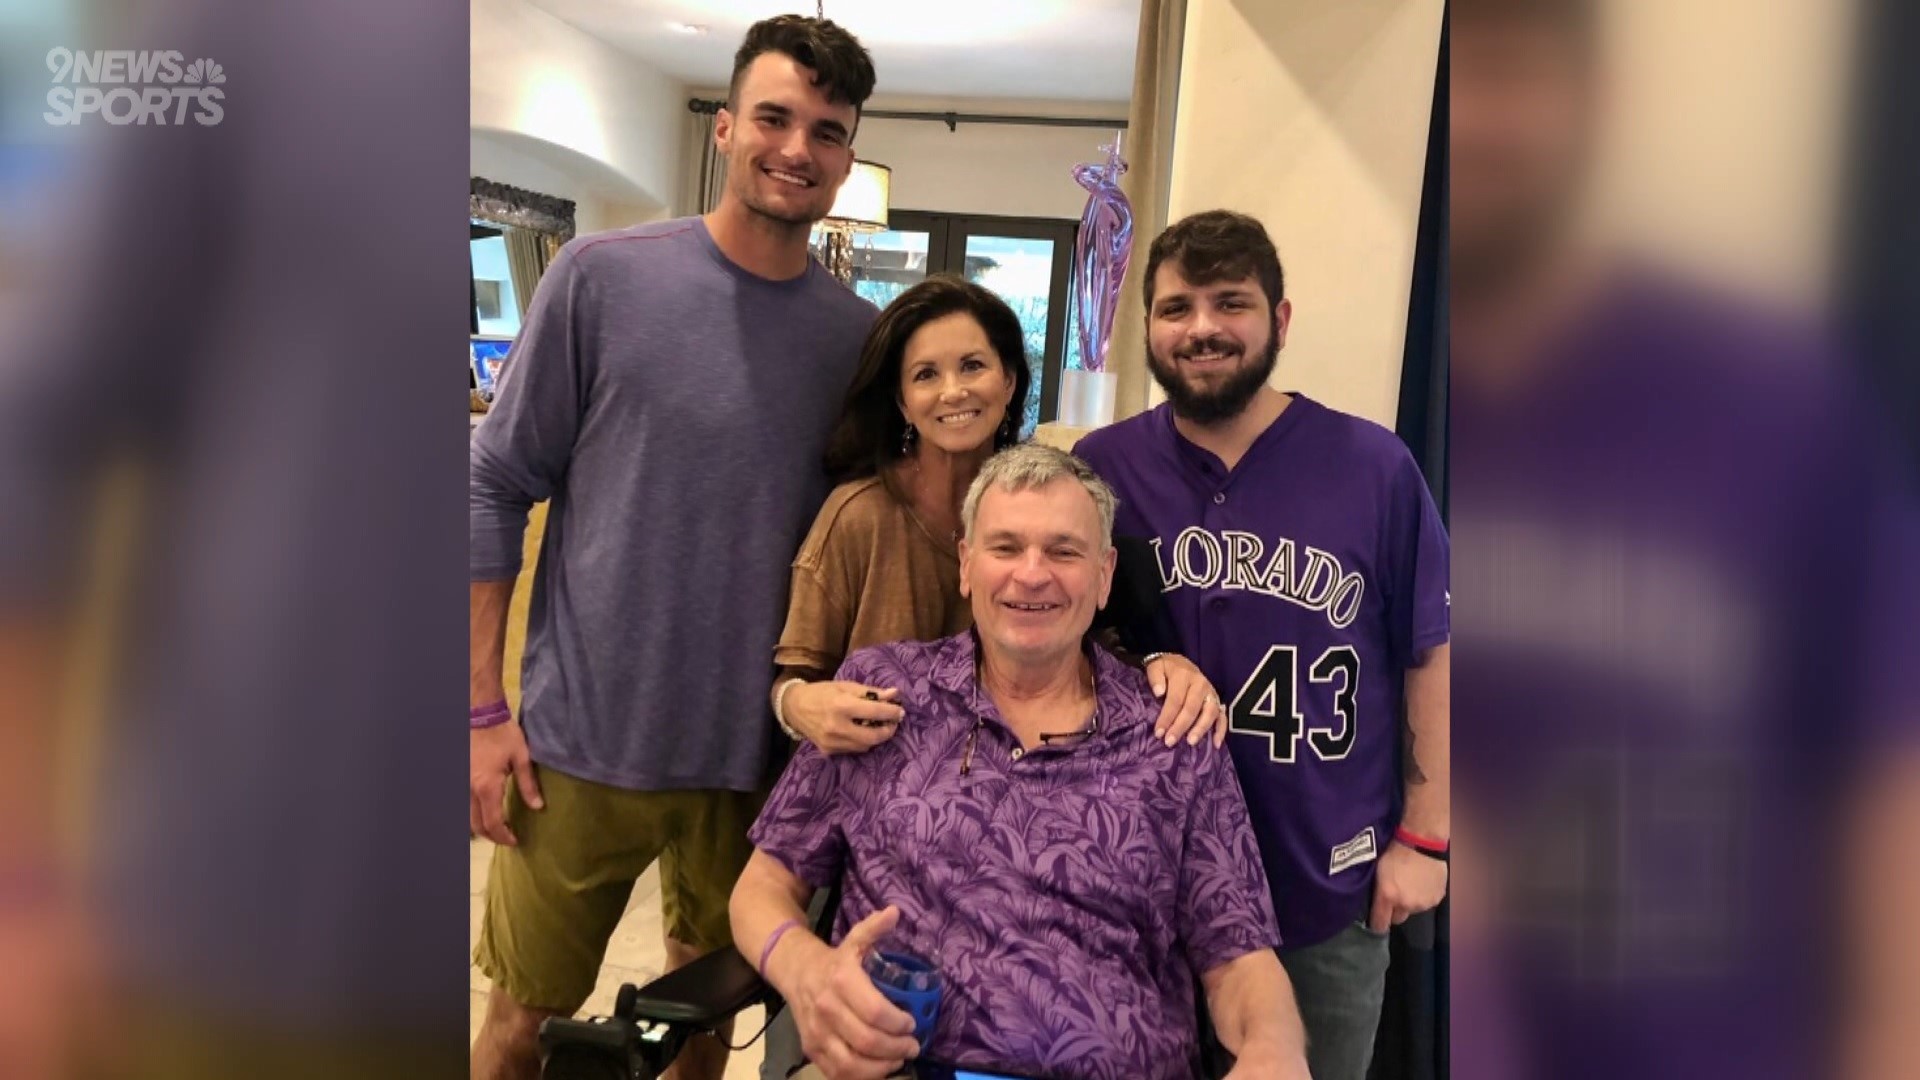 Rockies outfielder Sam Hilliard is a Texas native. His family, including father with ALS, will be present Friday in the season opener at the Rangers' new ballpark.